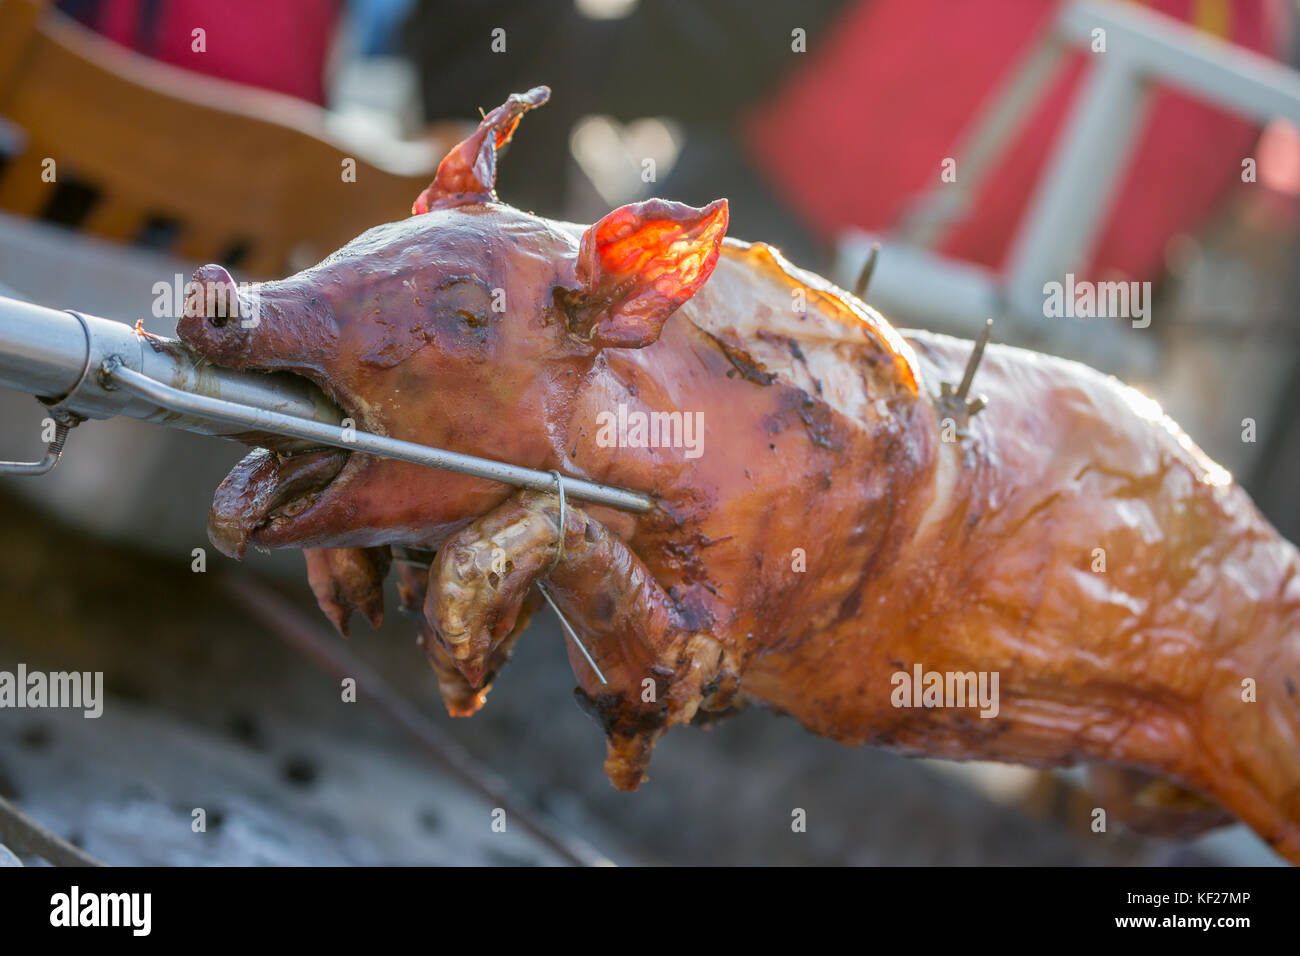 Grilling pig in the open Stock Photo